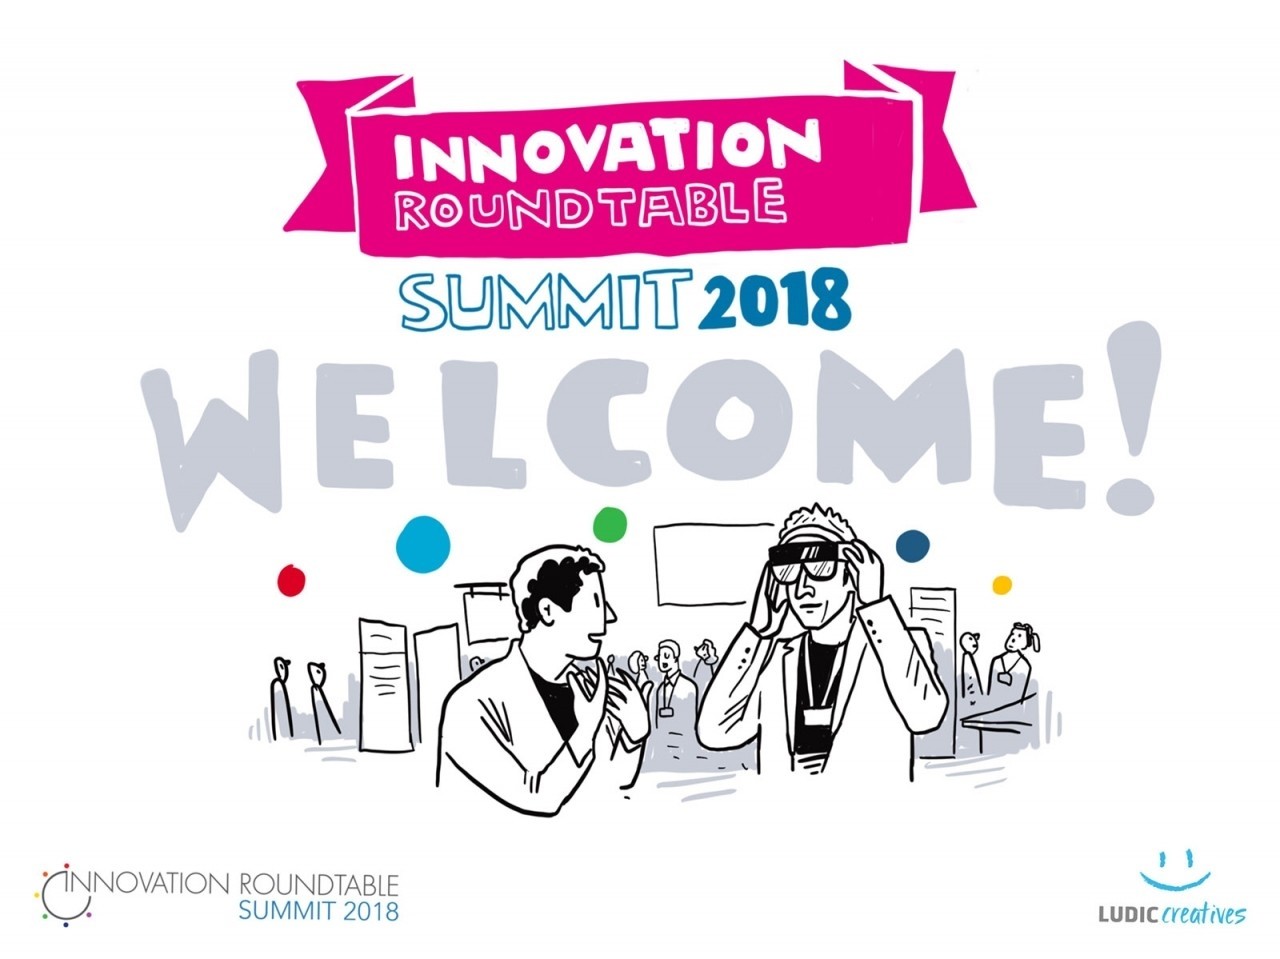 b2ap3_large_Ludic-Creatives-are-Technology-Partners-of-the-Innovation-Roundtable-Summit-2018-held-this-week-in-Copenhagen